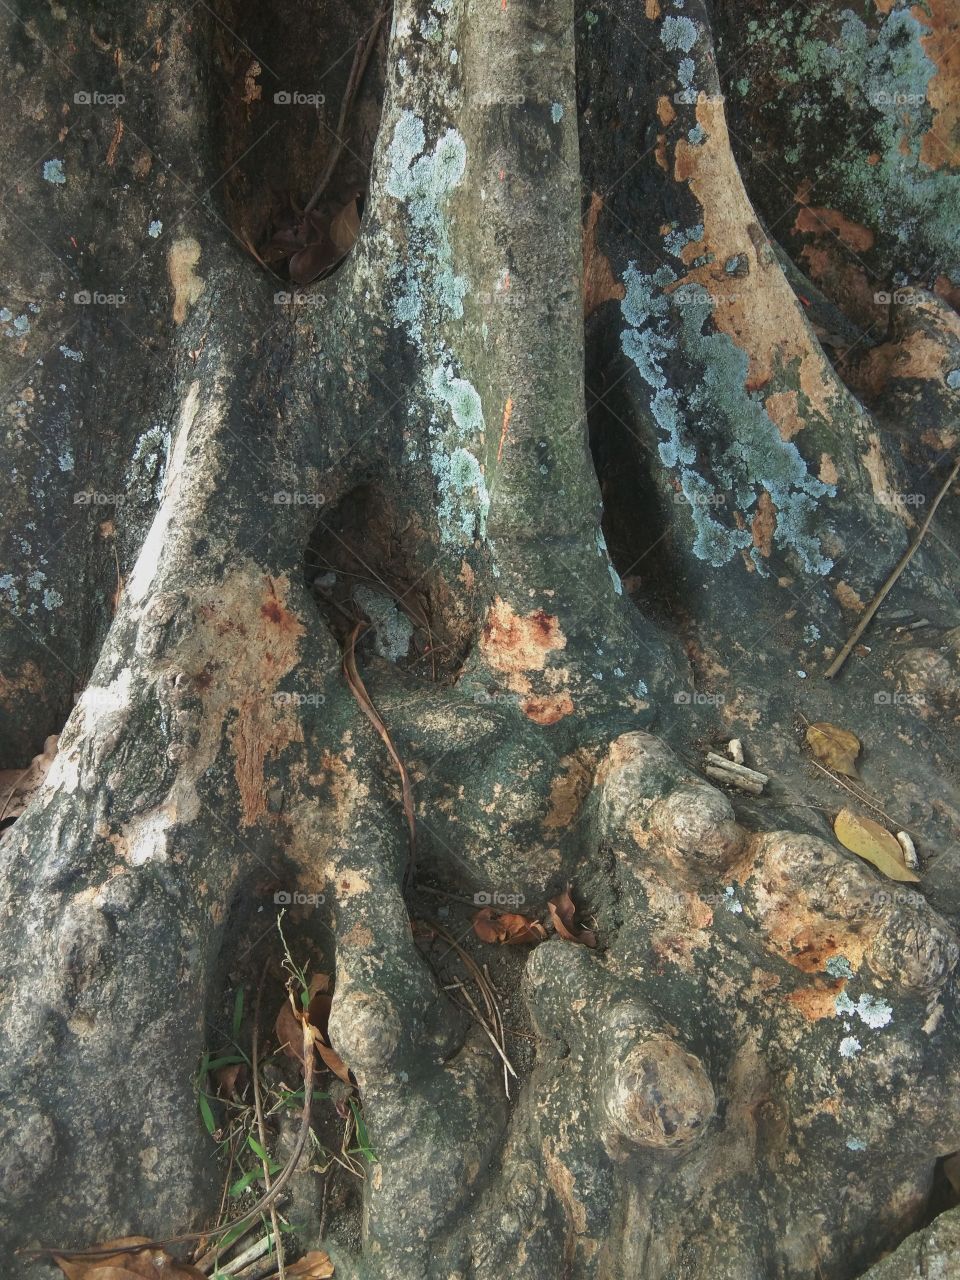 unique brown roots and large tree trunks